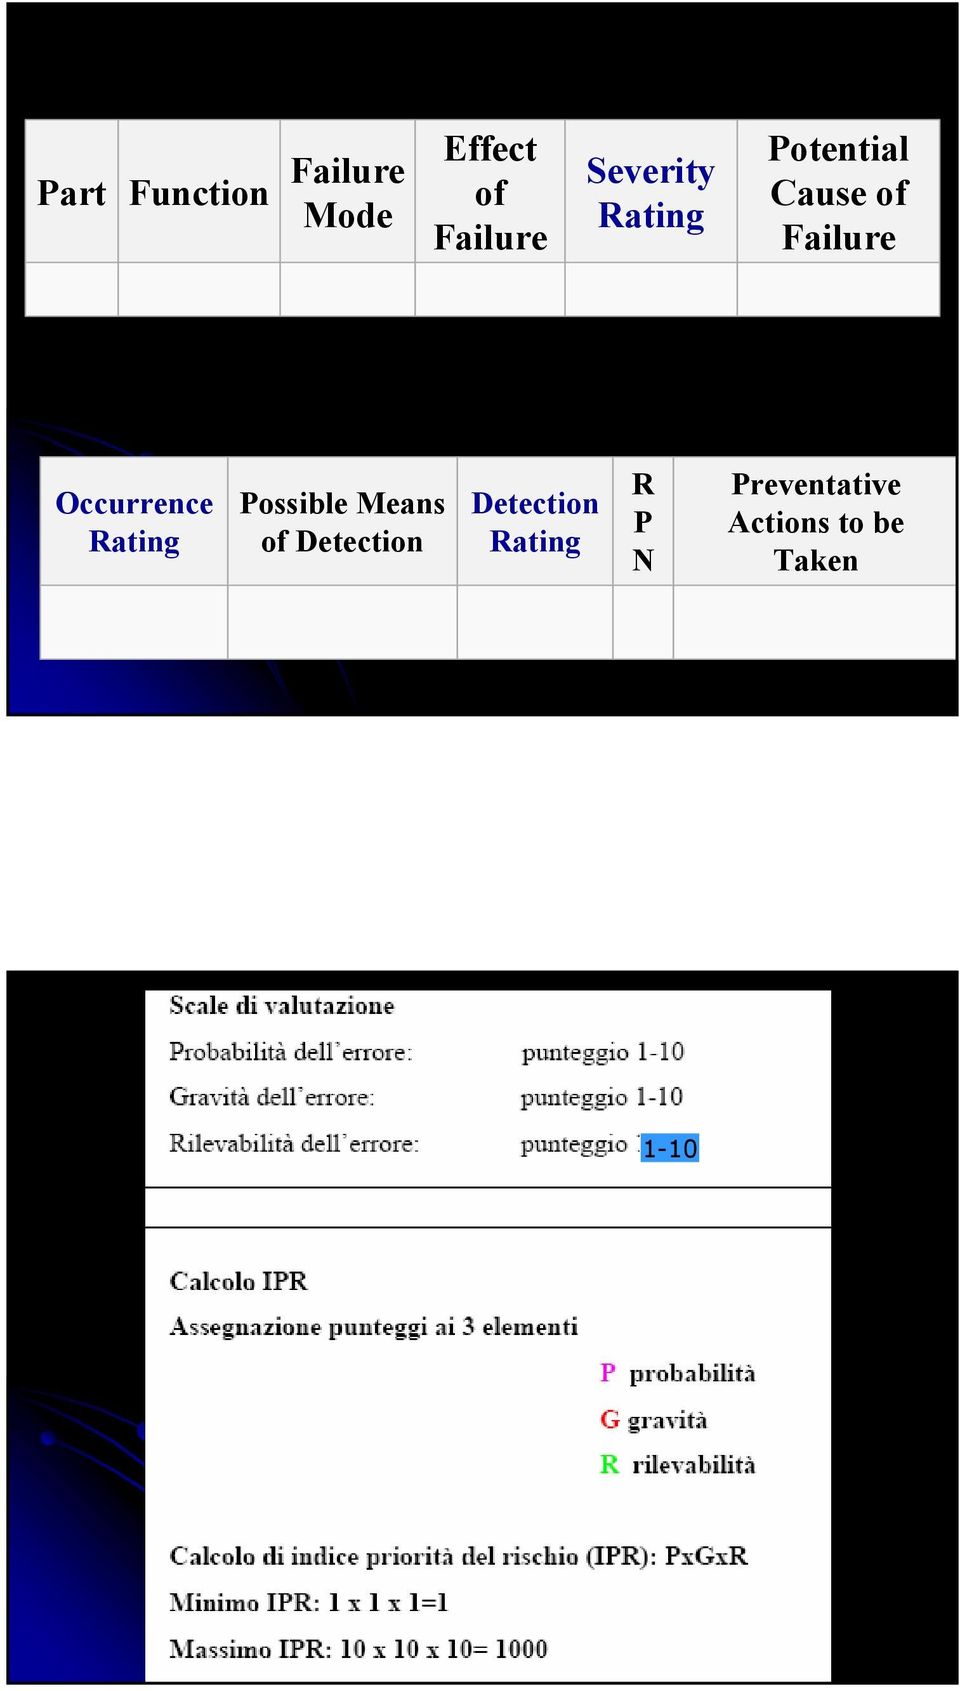 Occurrence Rating Possible Means of Detection